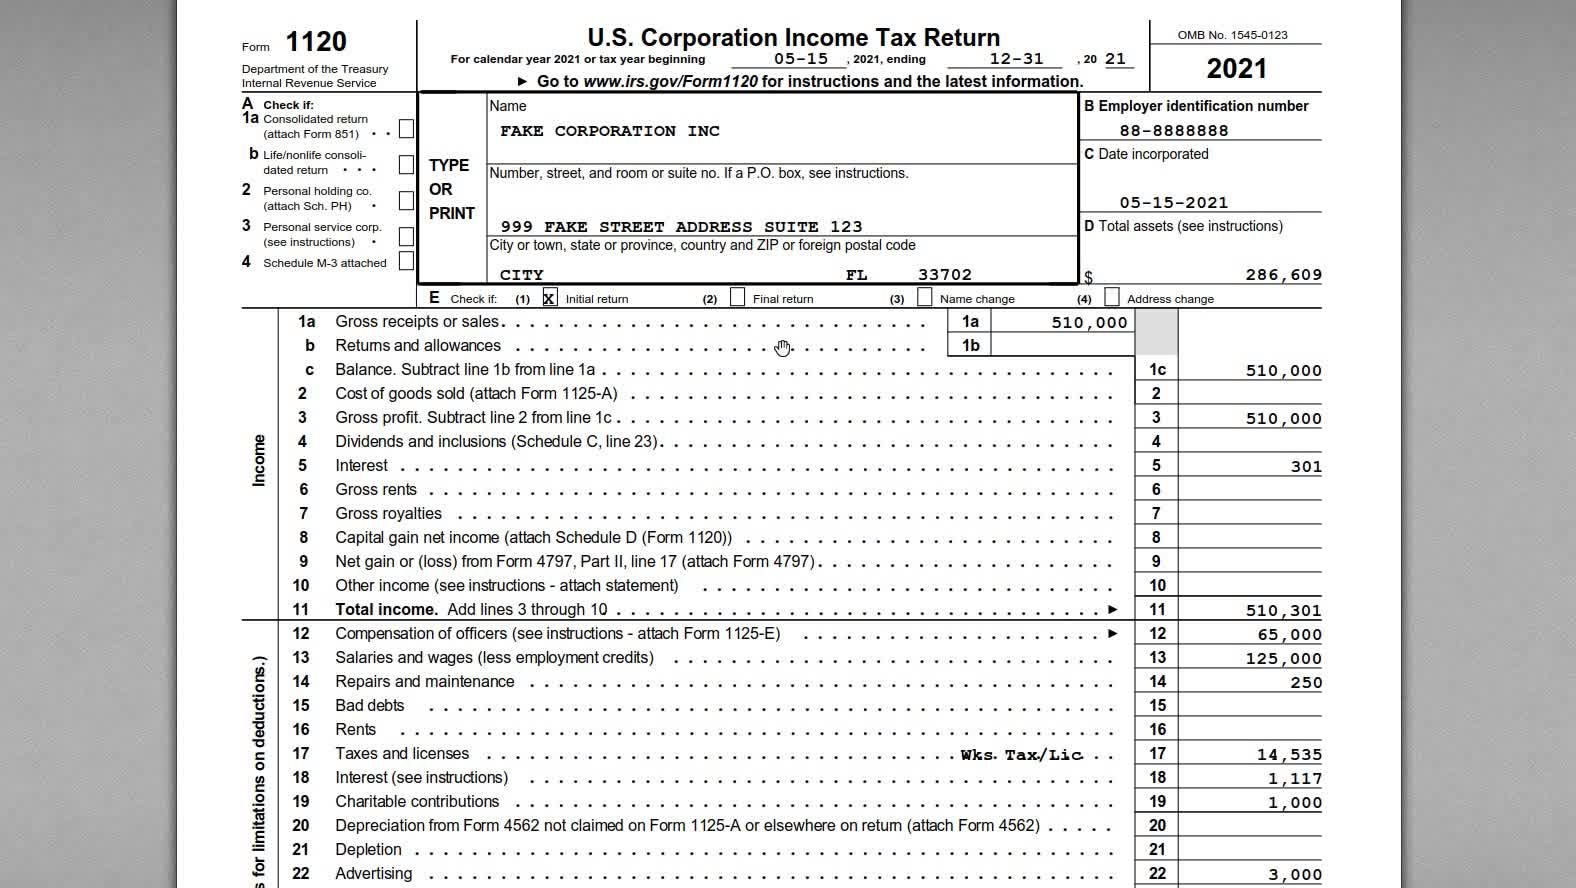 How to Fill Out Form 1120 for 2021. StepbyStep Instructions